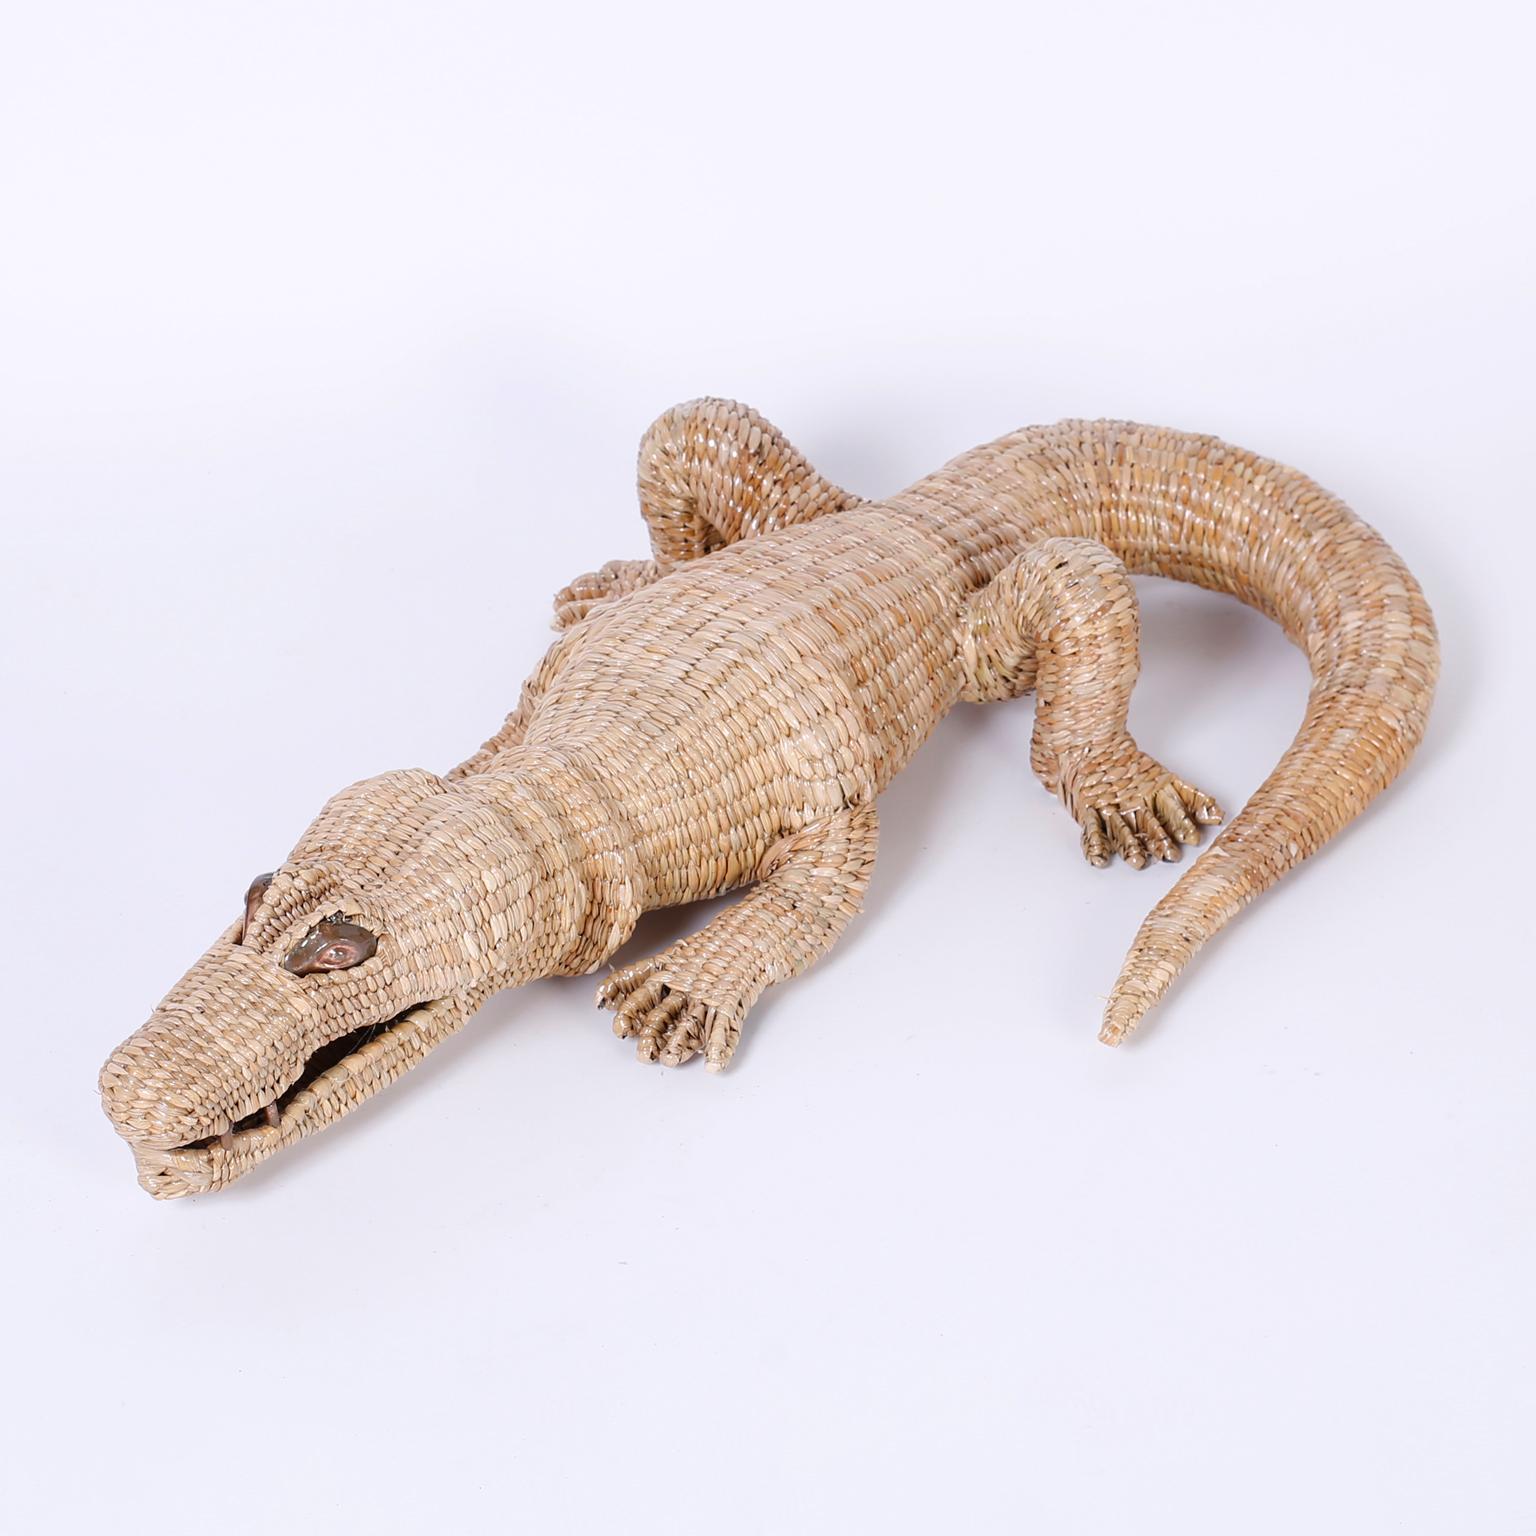 Whimsical alligator sculpture crafted with wicker or reed woven over a metal frame, that captures the prehistoric spirit of the tropical creature in an amusing way, signed Mario Torres 1974 on a brass medallion.